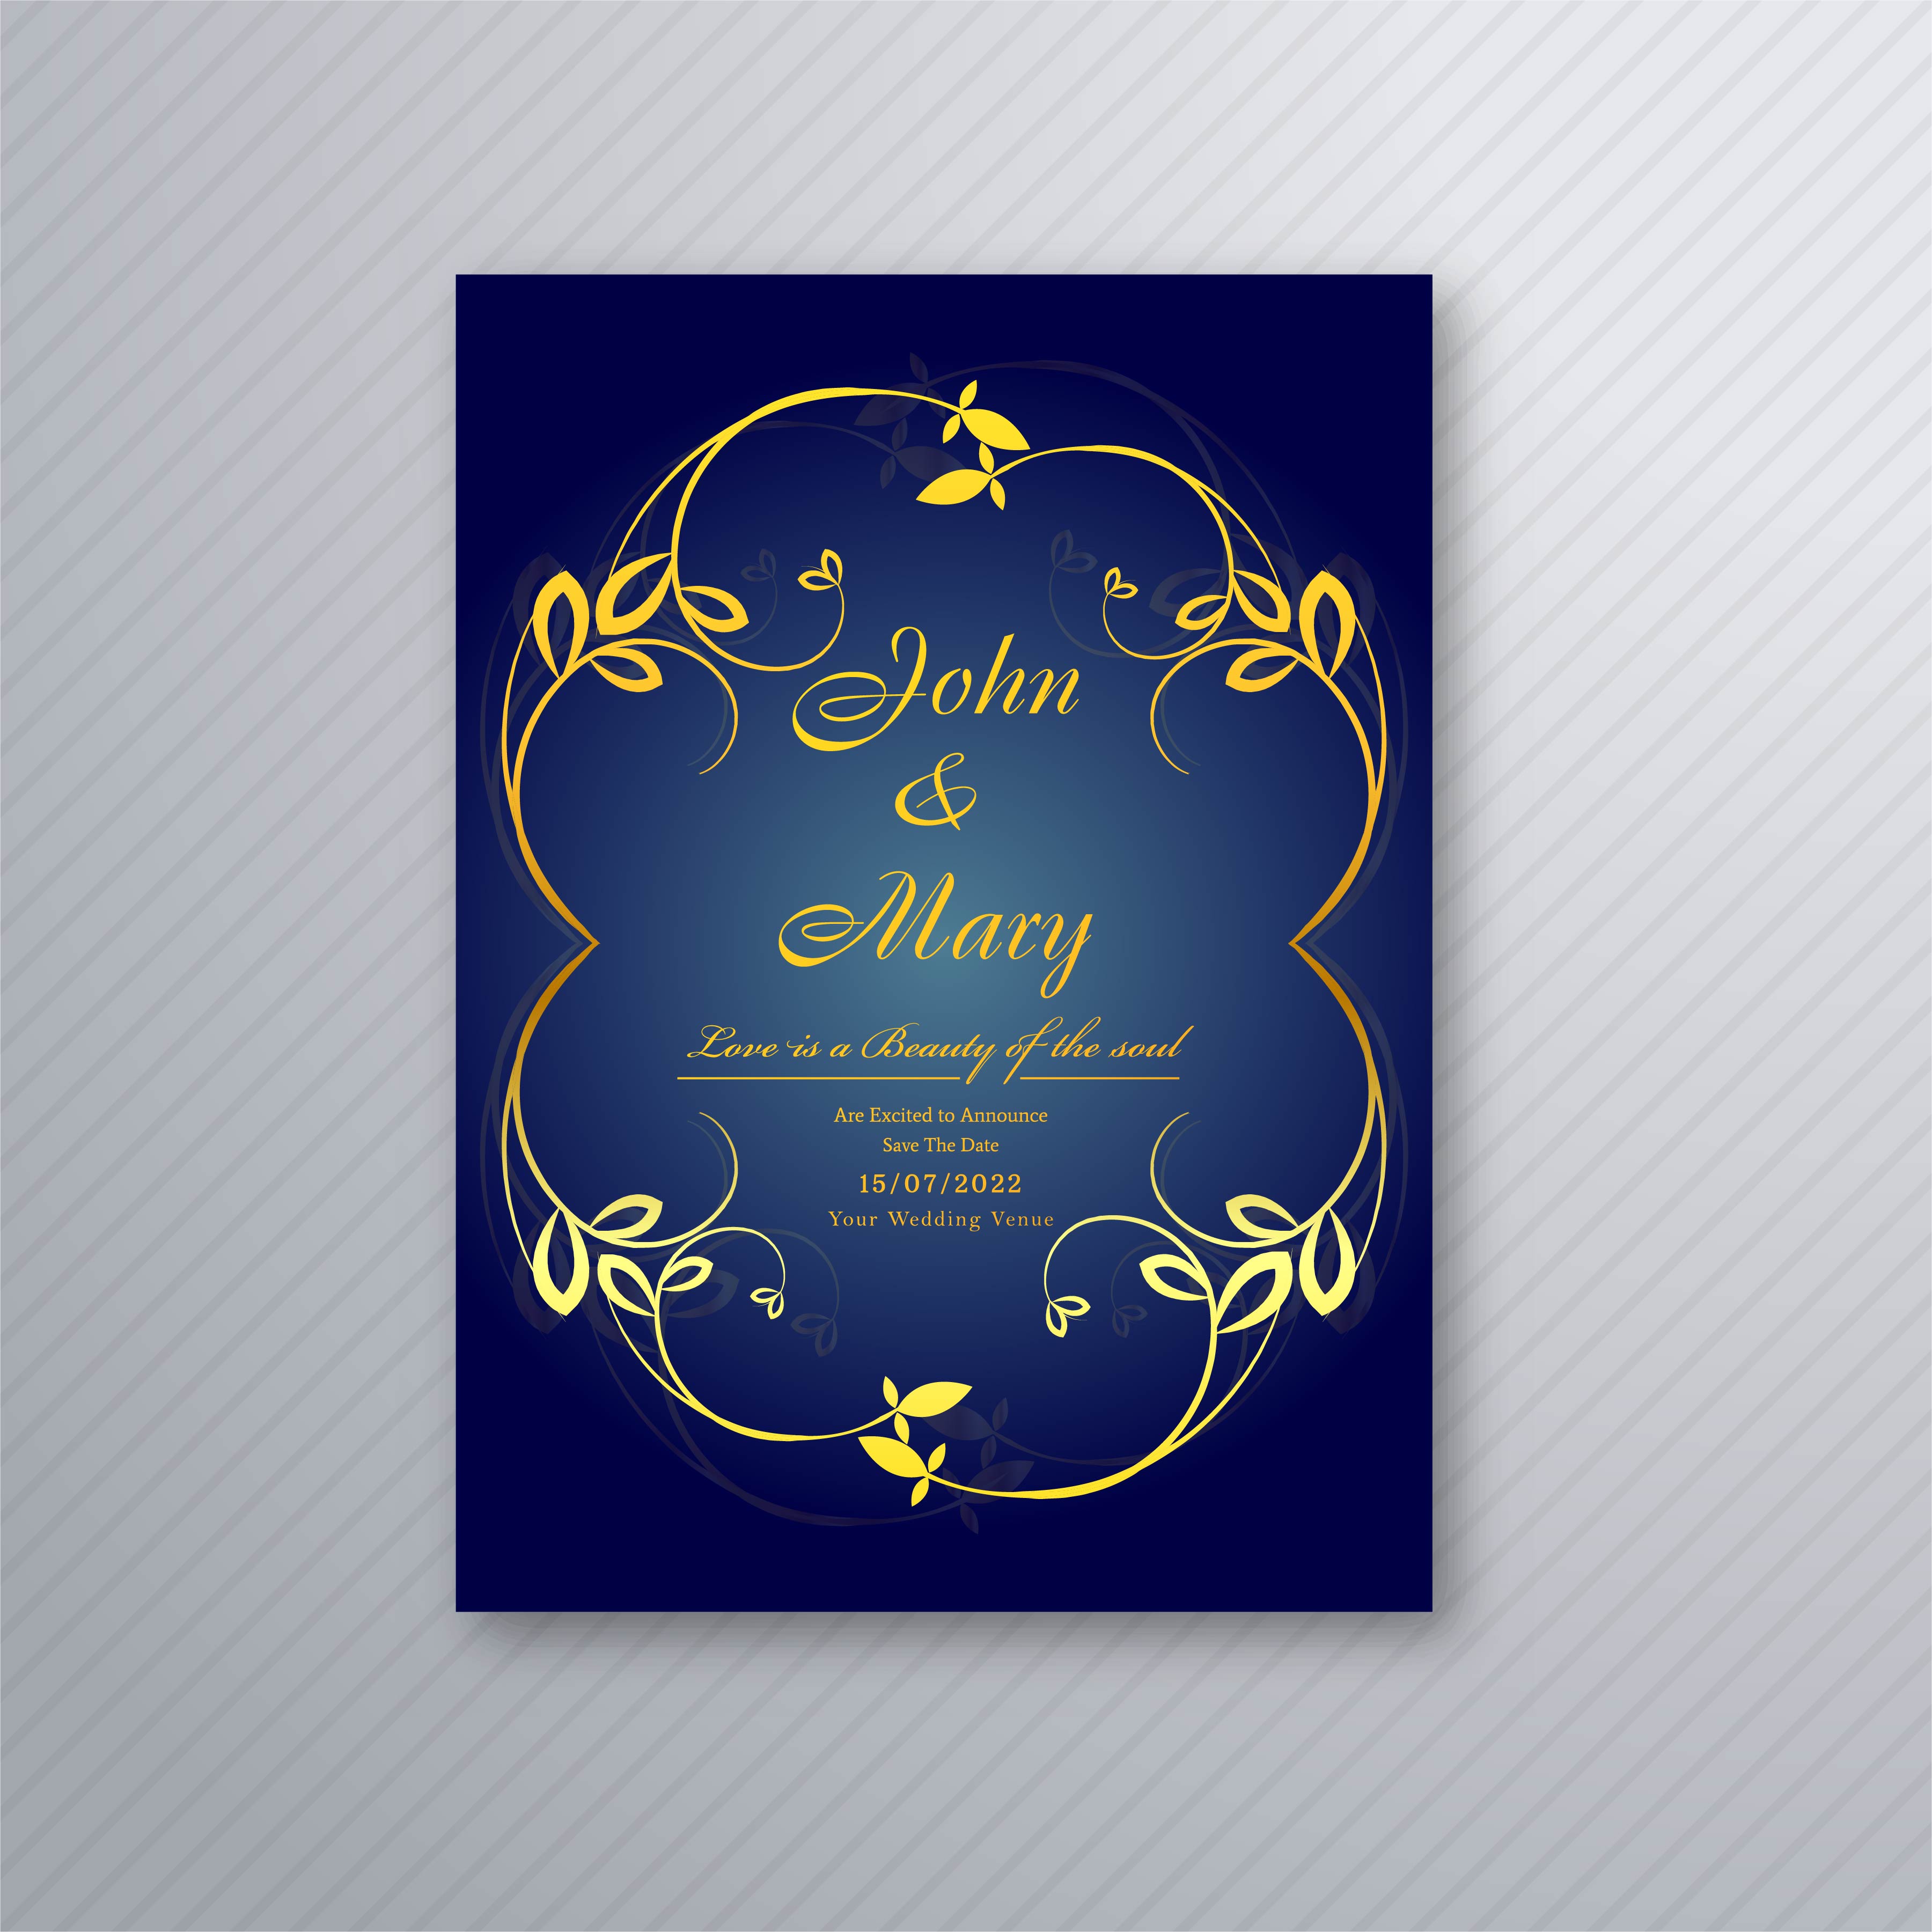 Pakistani Wedding Card Design Template Free Download 42 How To Buy A 